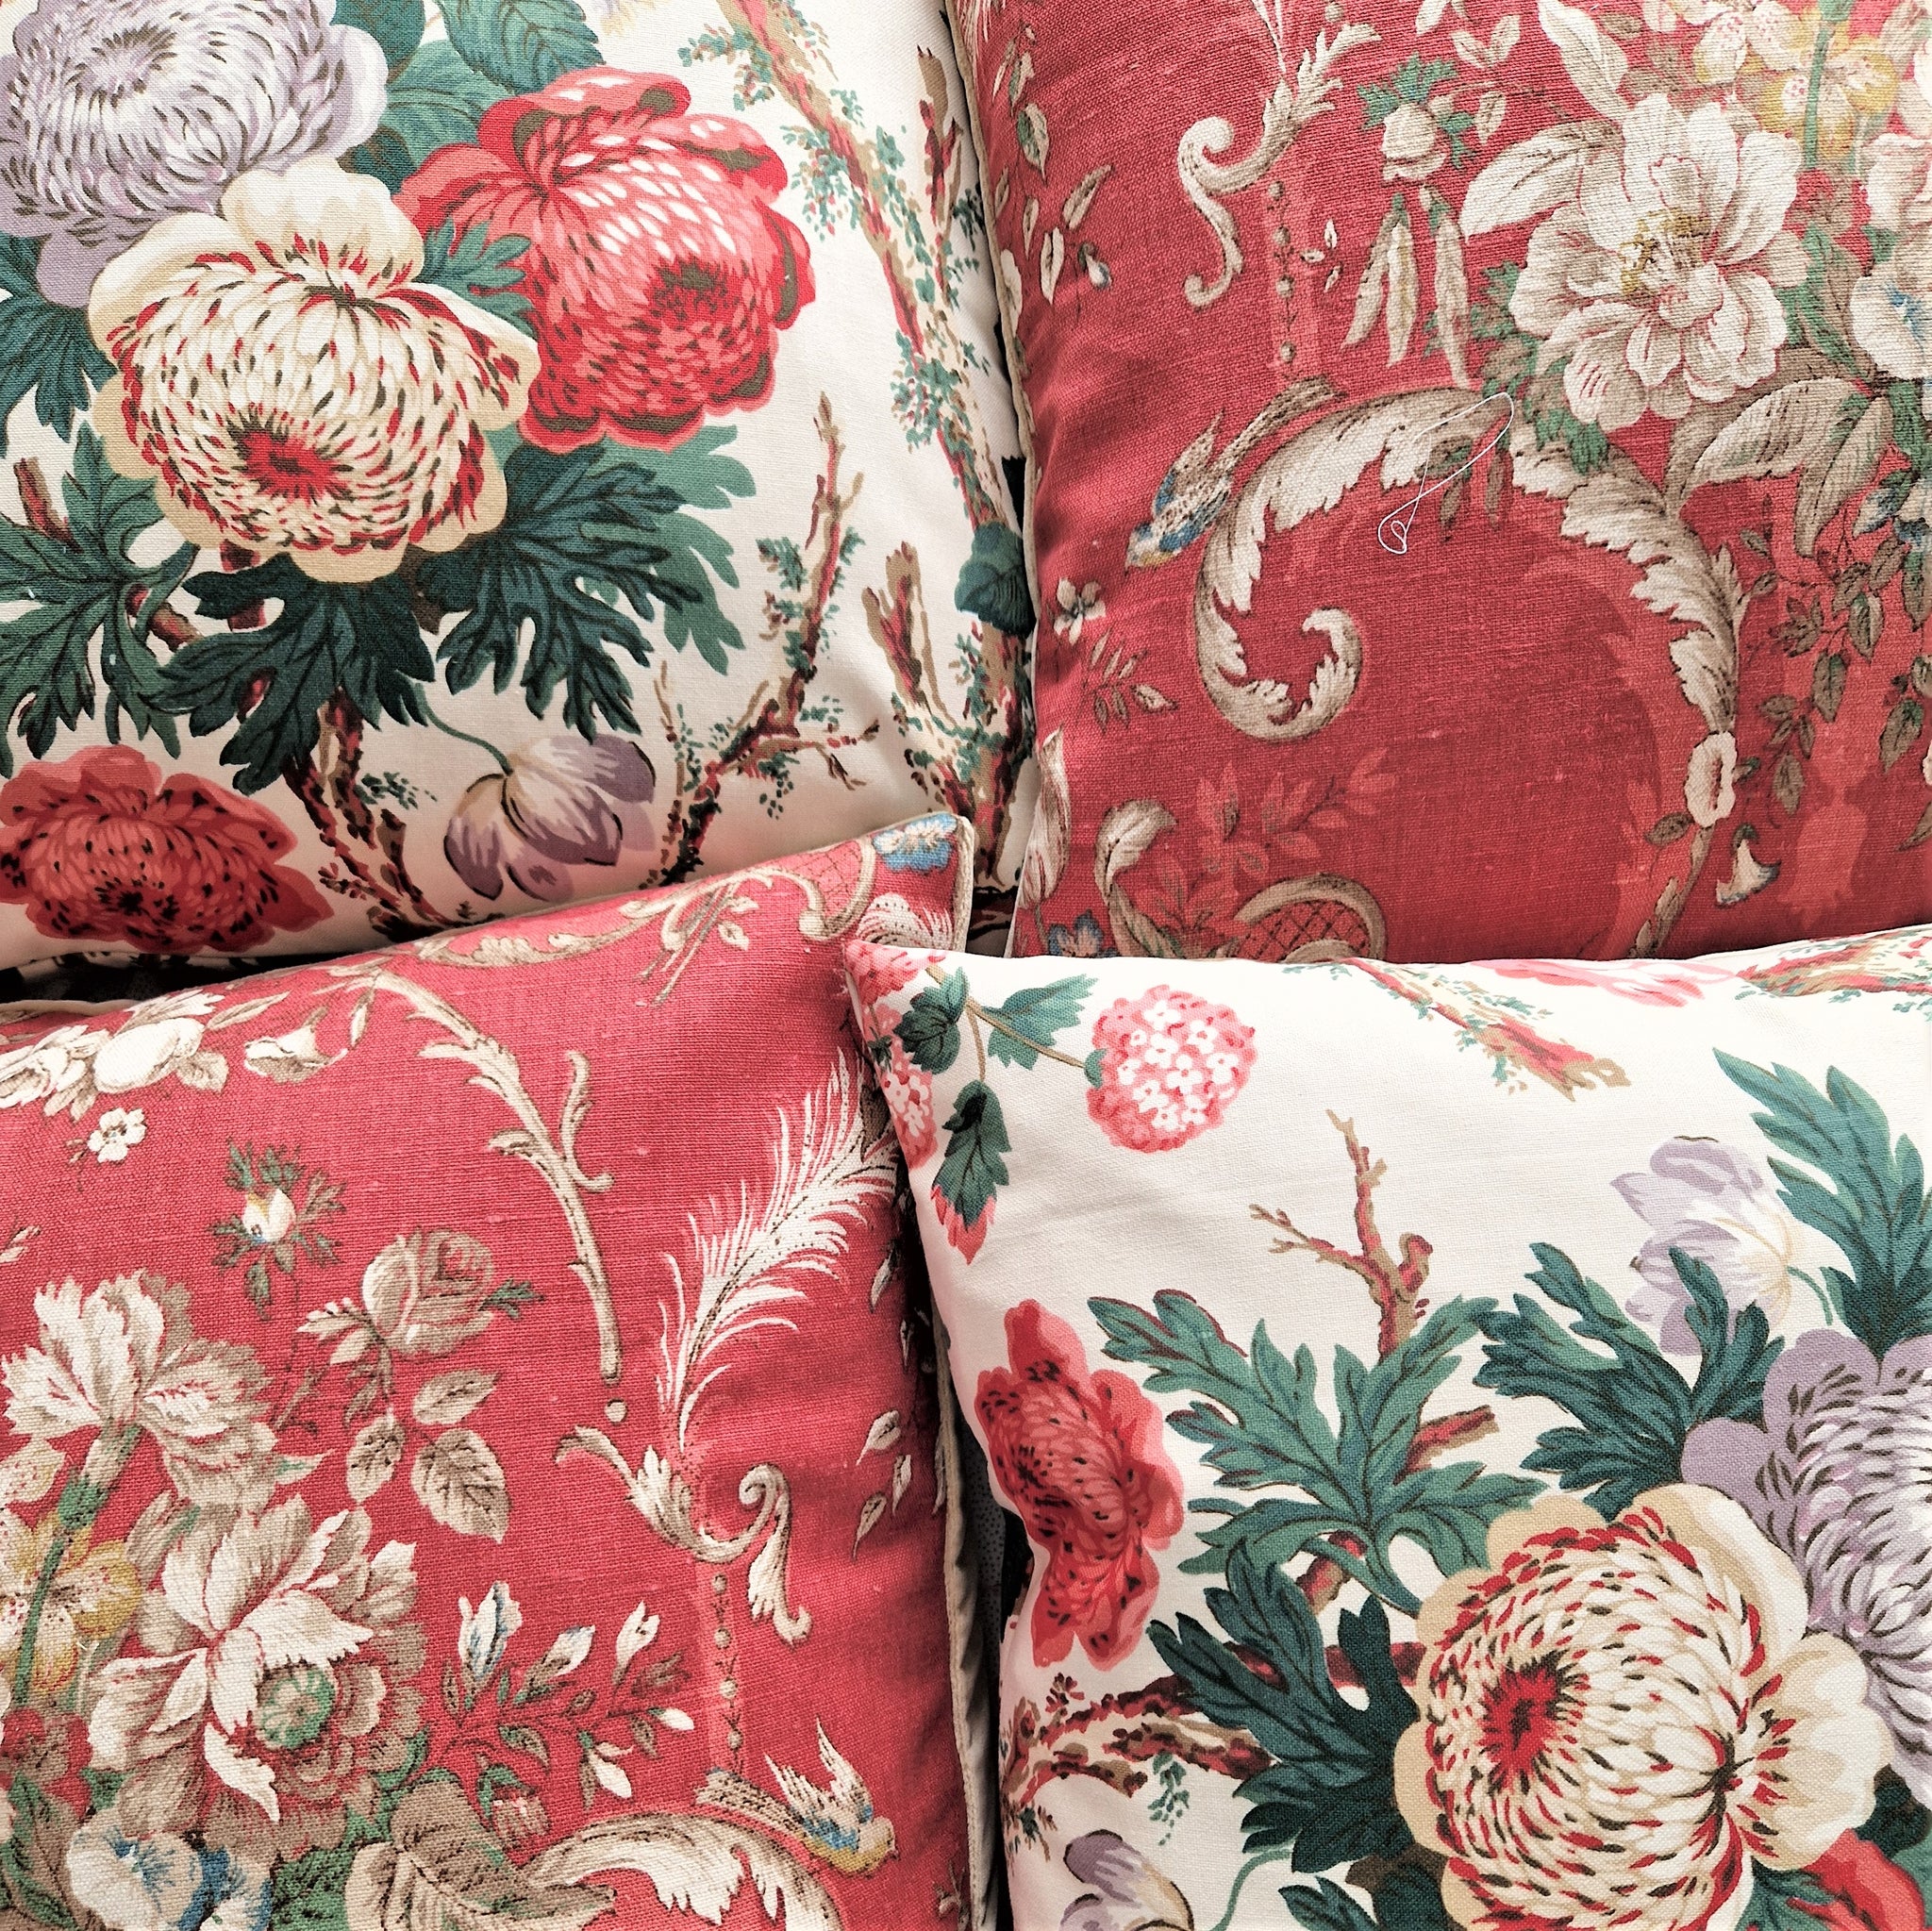 Vintage Floral Fabric Cushion Cover In Stunning Sanderson Scrolls And Florals